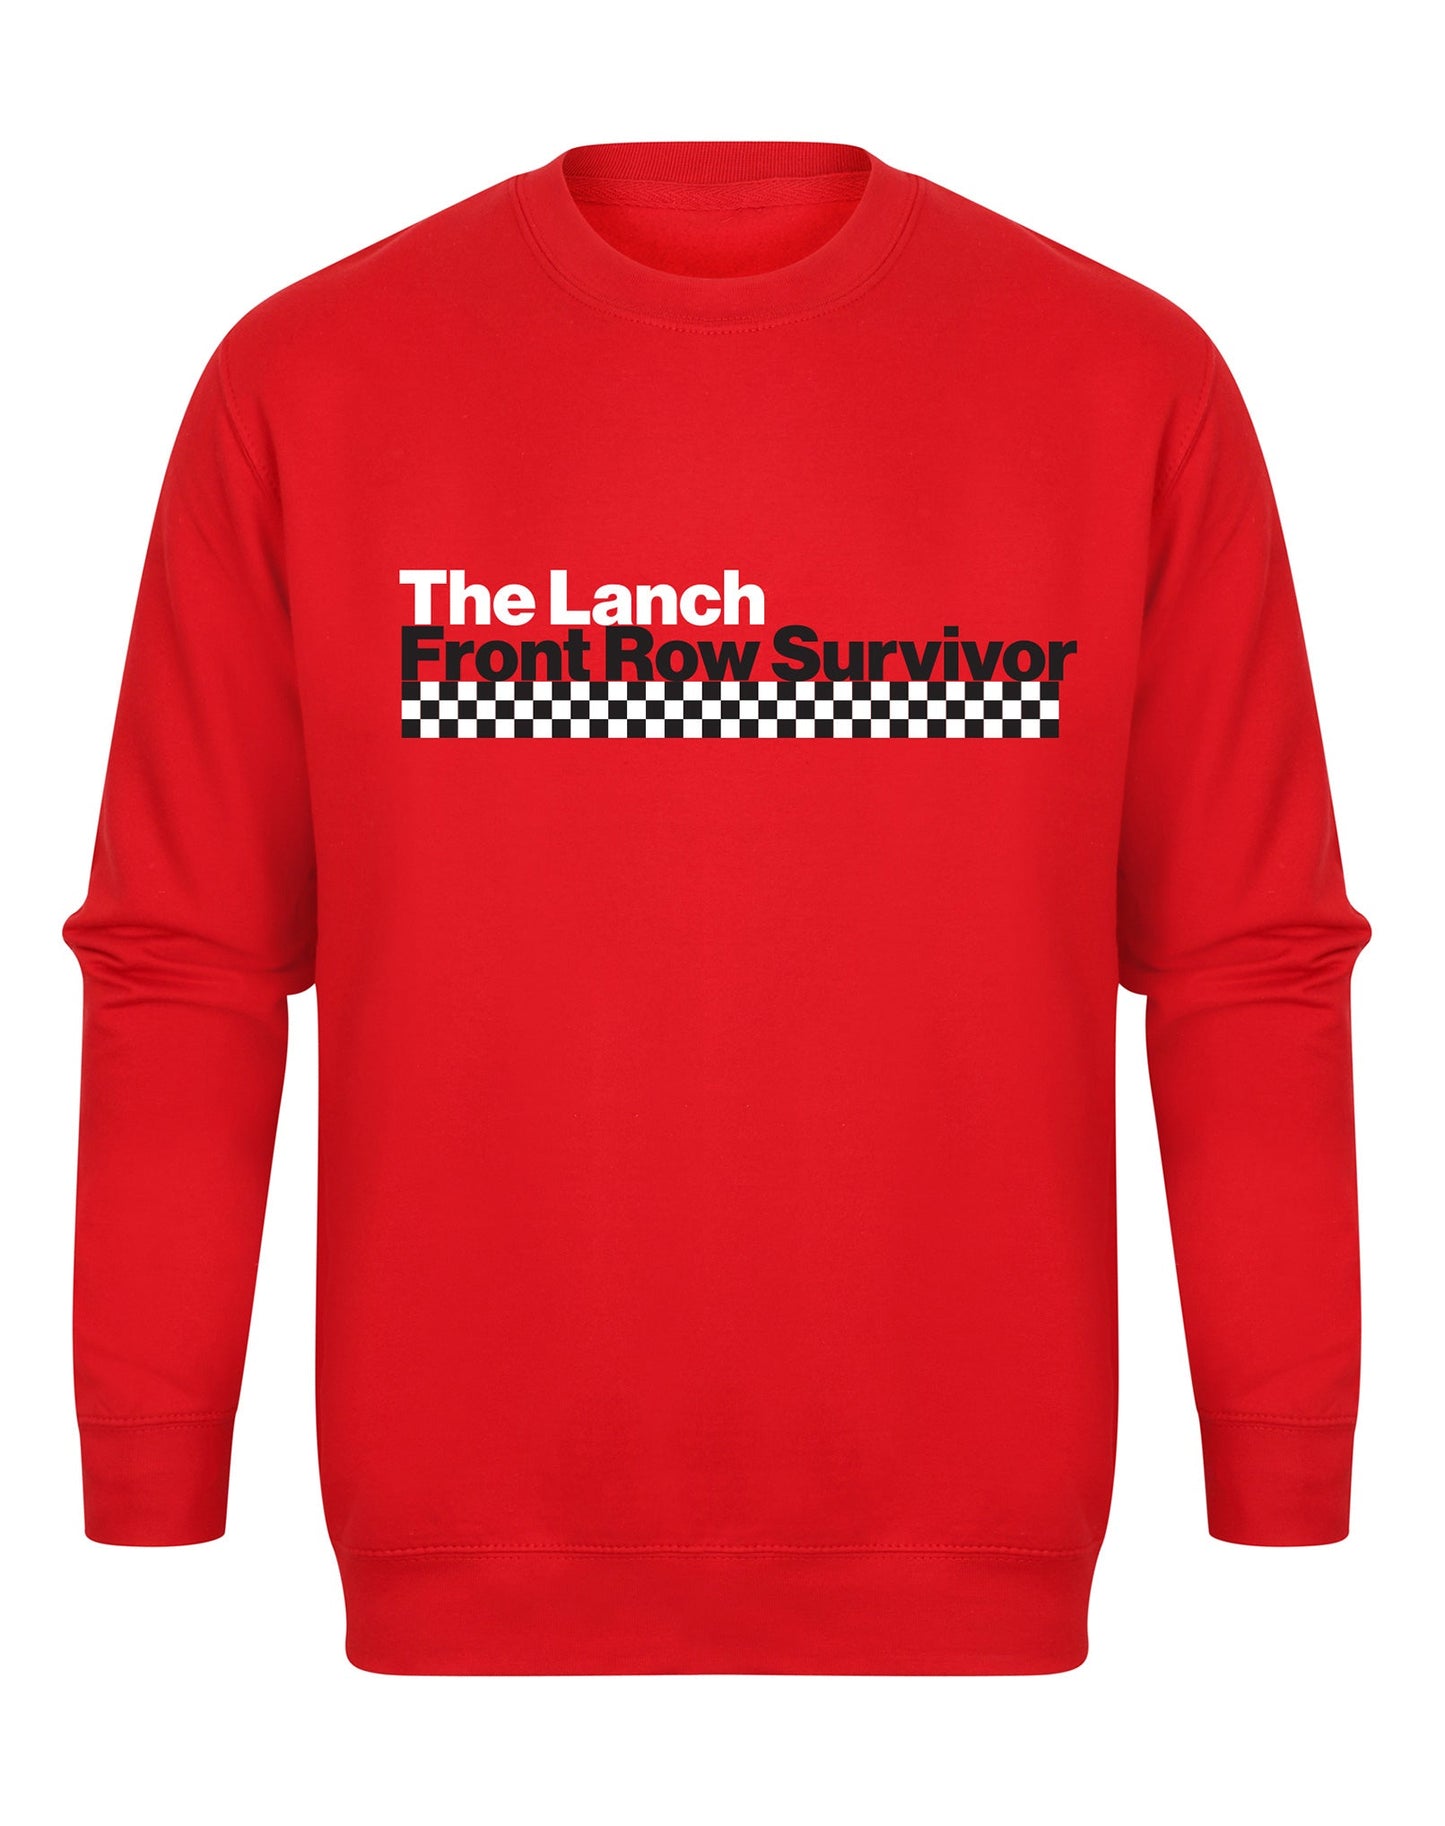 The Lanch - Front Row Survivor - sweatshirt - various colours - Dirty Stop Outs